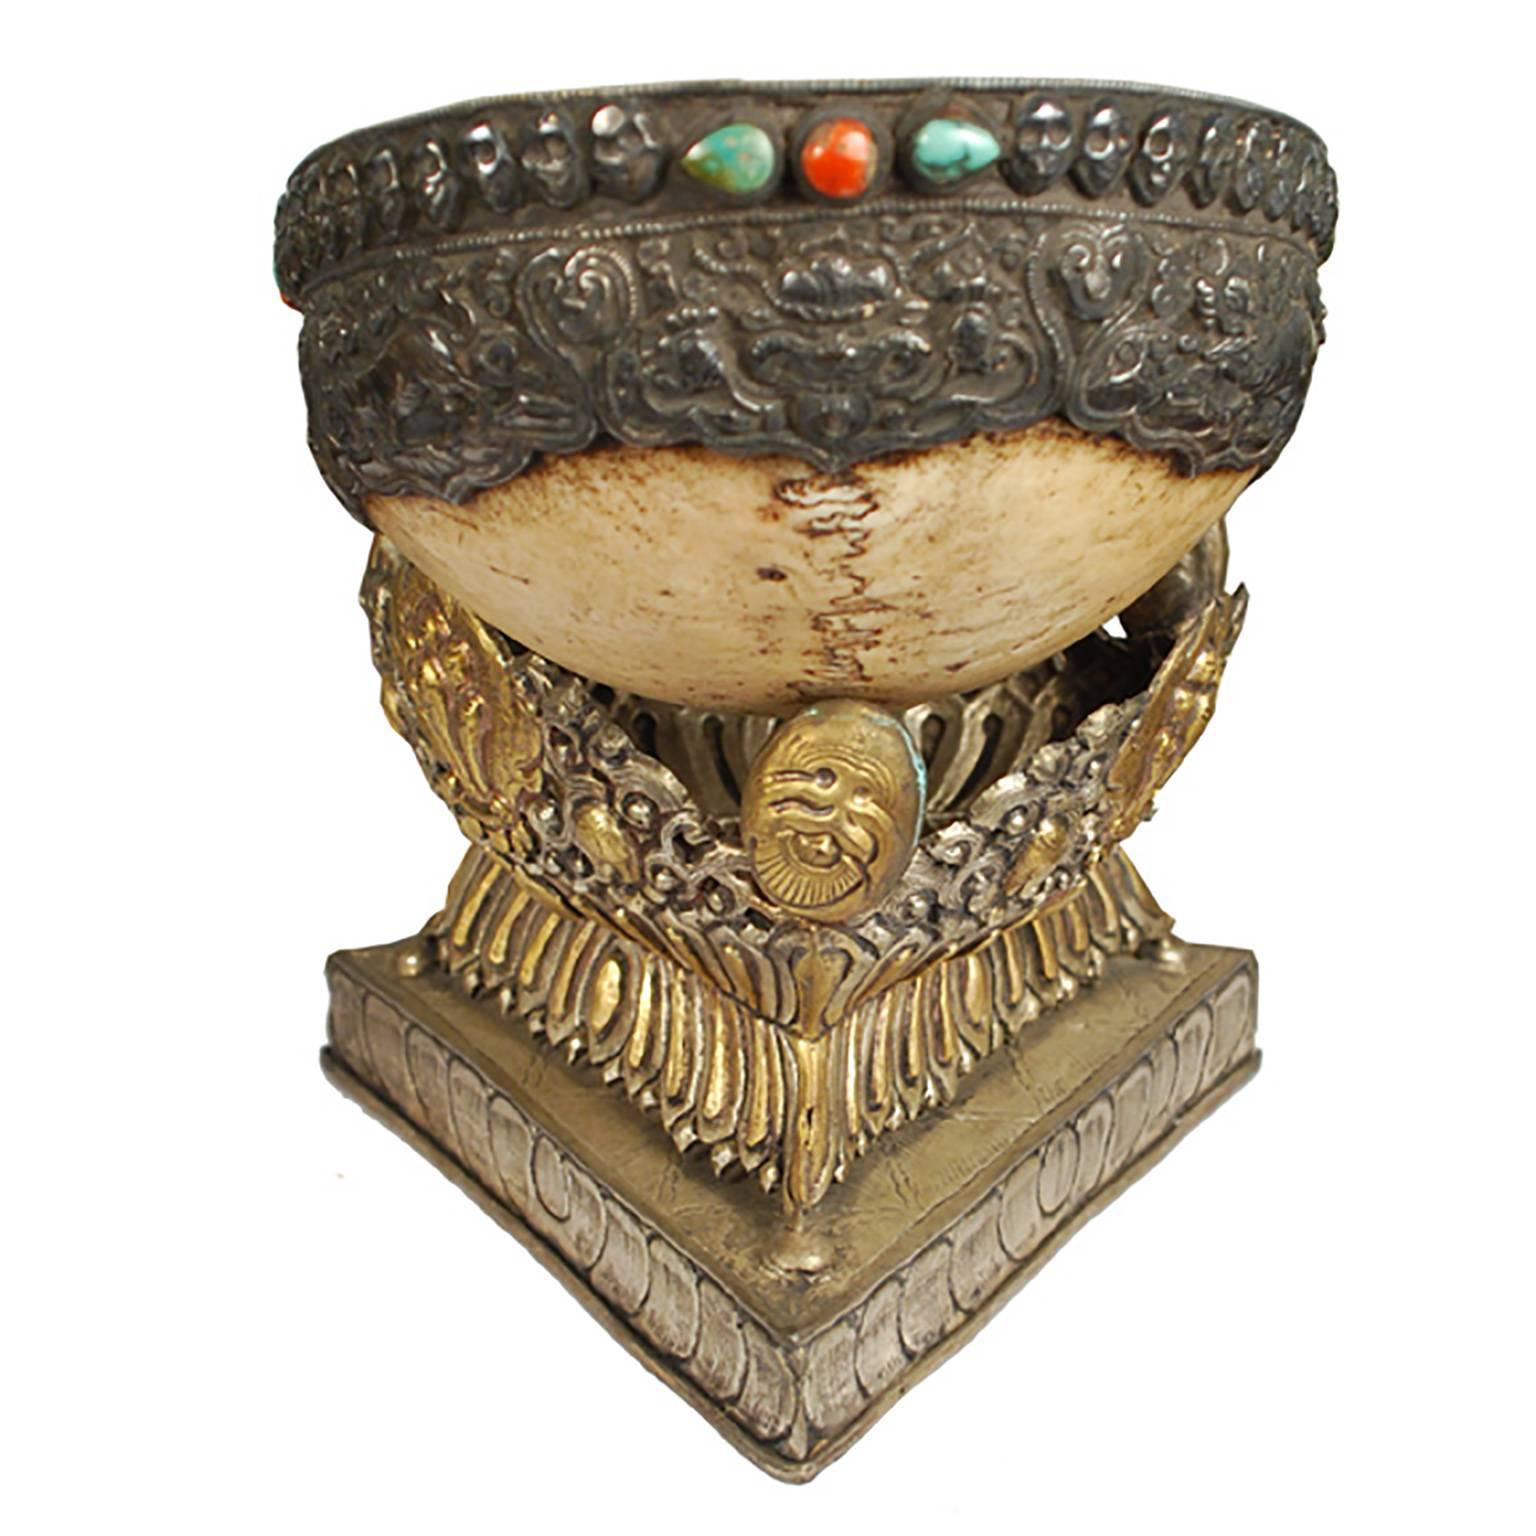 A Sanskrit term meaning “skull,” this 18th century kapala incorporates a human skull into the bowl of a ritual vessel. According to ancient Tibetan custom, skulls for this purpose were collected at burial sites, where remains were scattered to